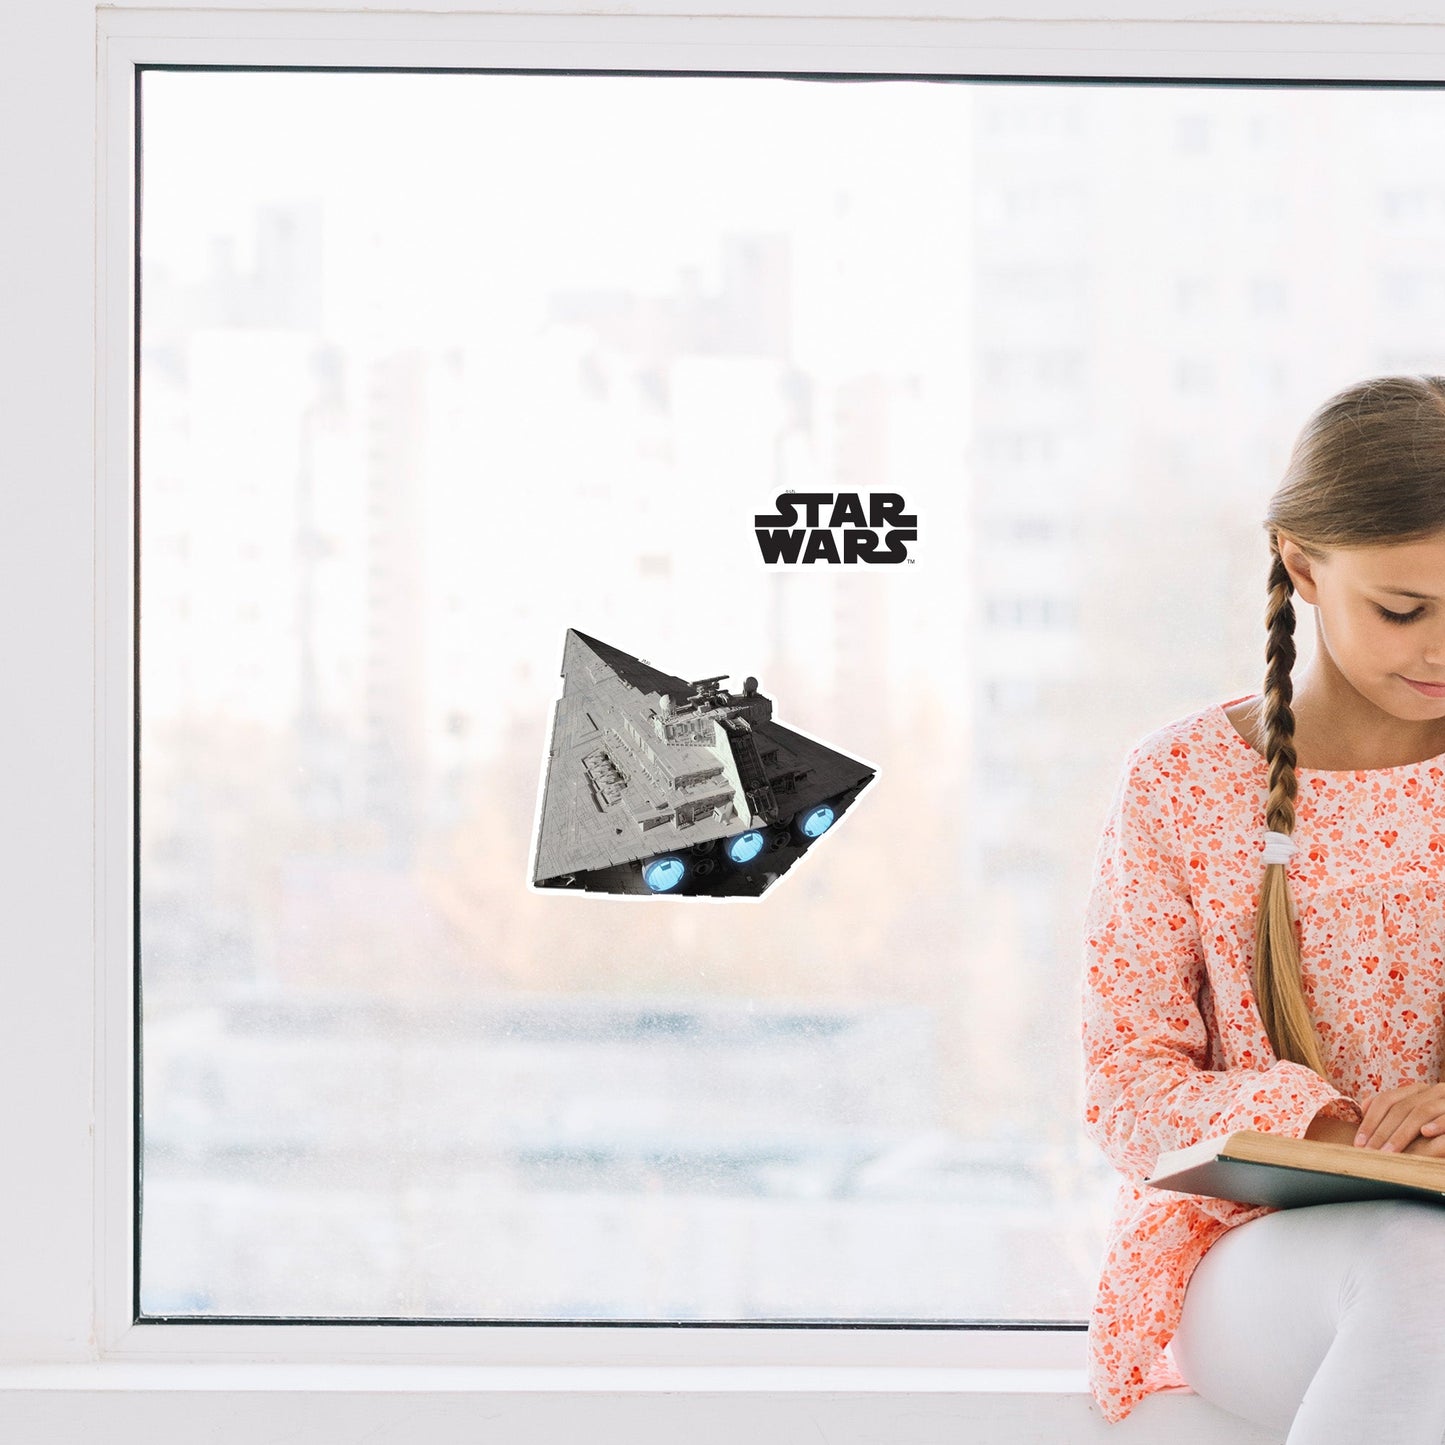 Star Destroyer_above Window Clings - Officially Licensed Star Wars Removable Window Static Decal